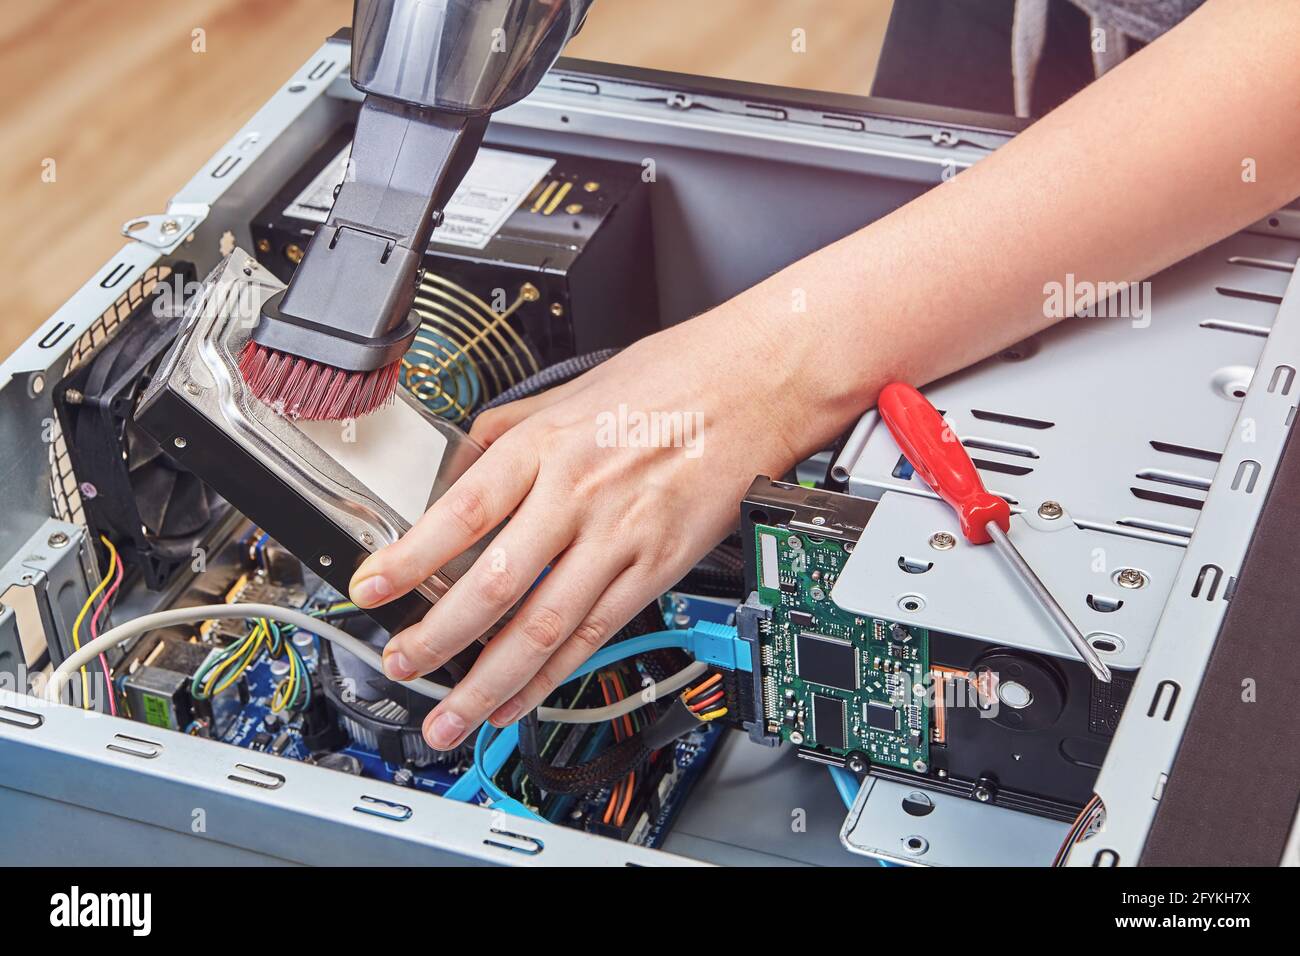 Remove dust from hard disk drive of desktop PC using vacuum cleaner Stock  Photo - Alamy